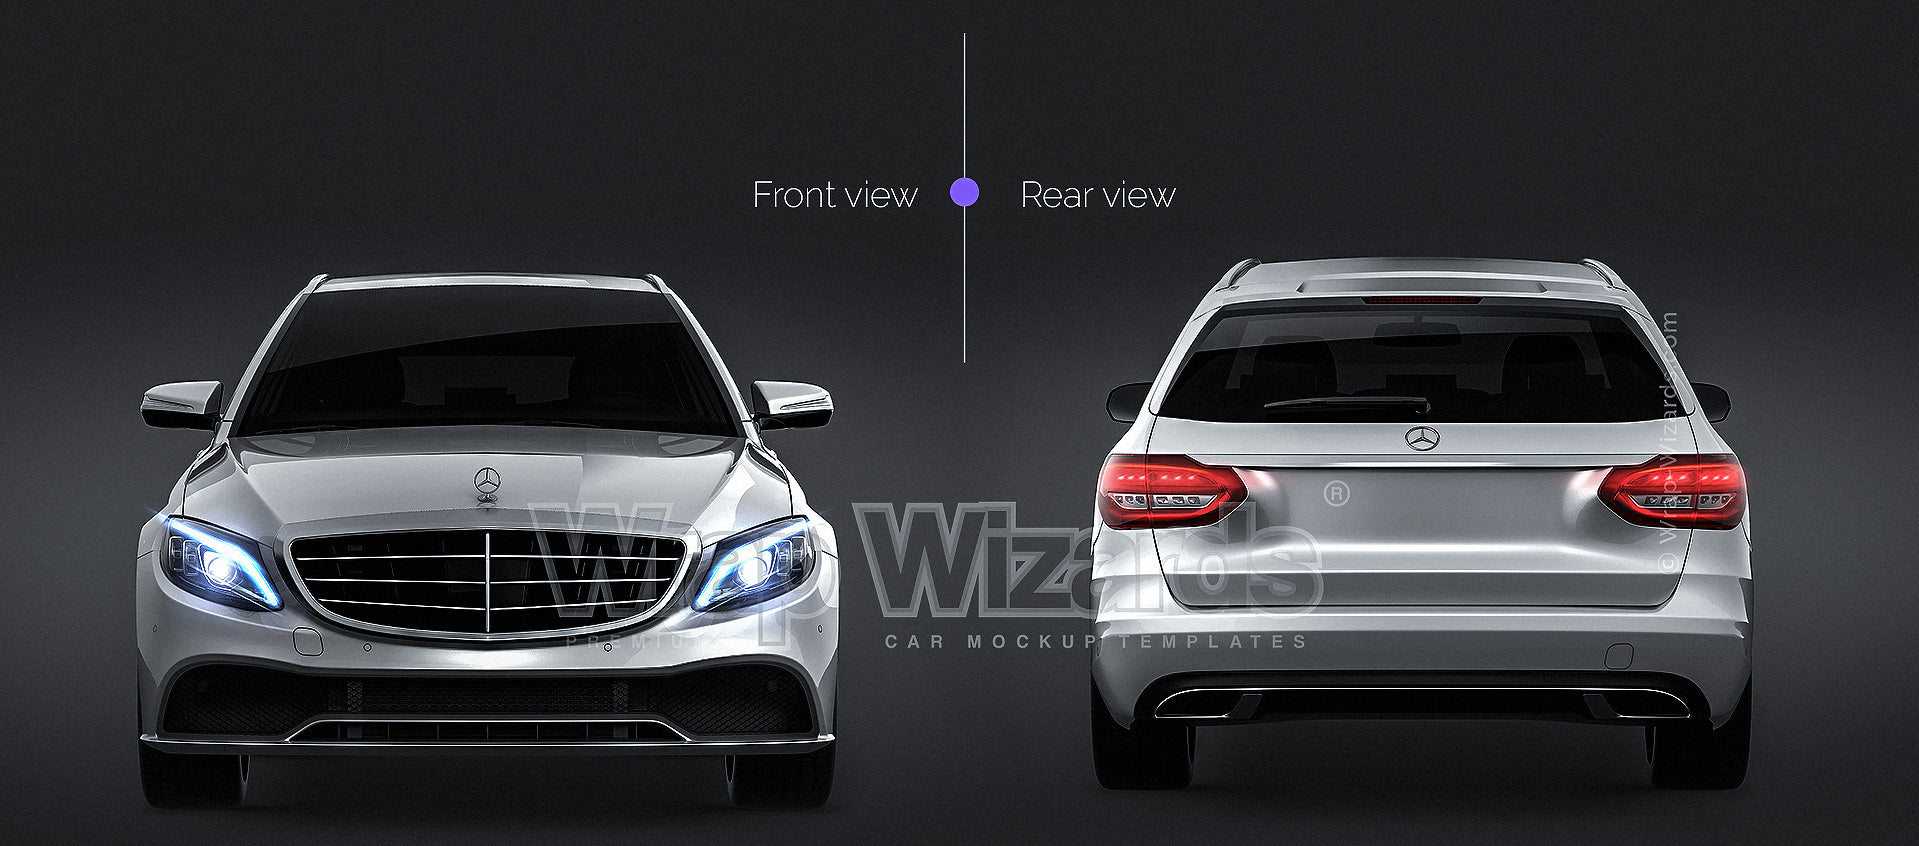 Mercedes-Benz C-class Estate 2019 glossy finish - all sides Car Mockup Template.psd